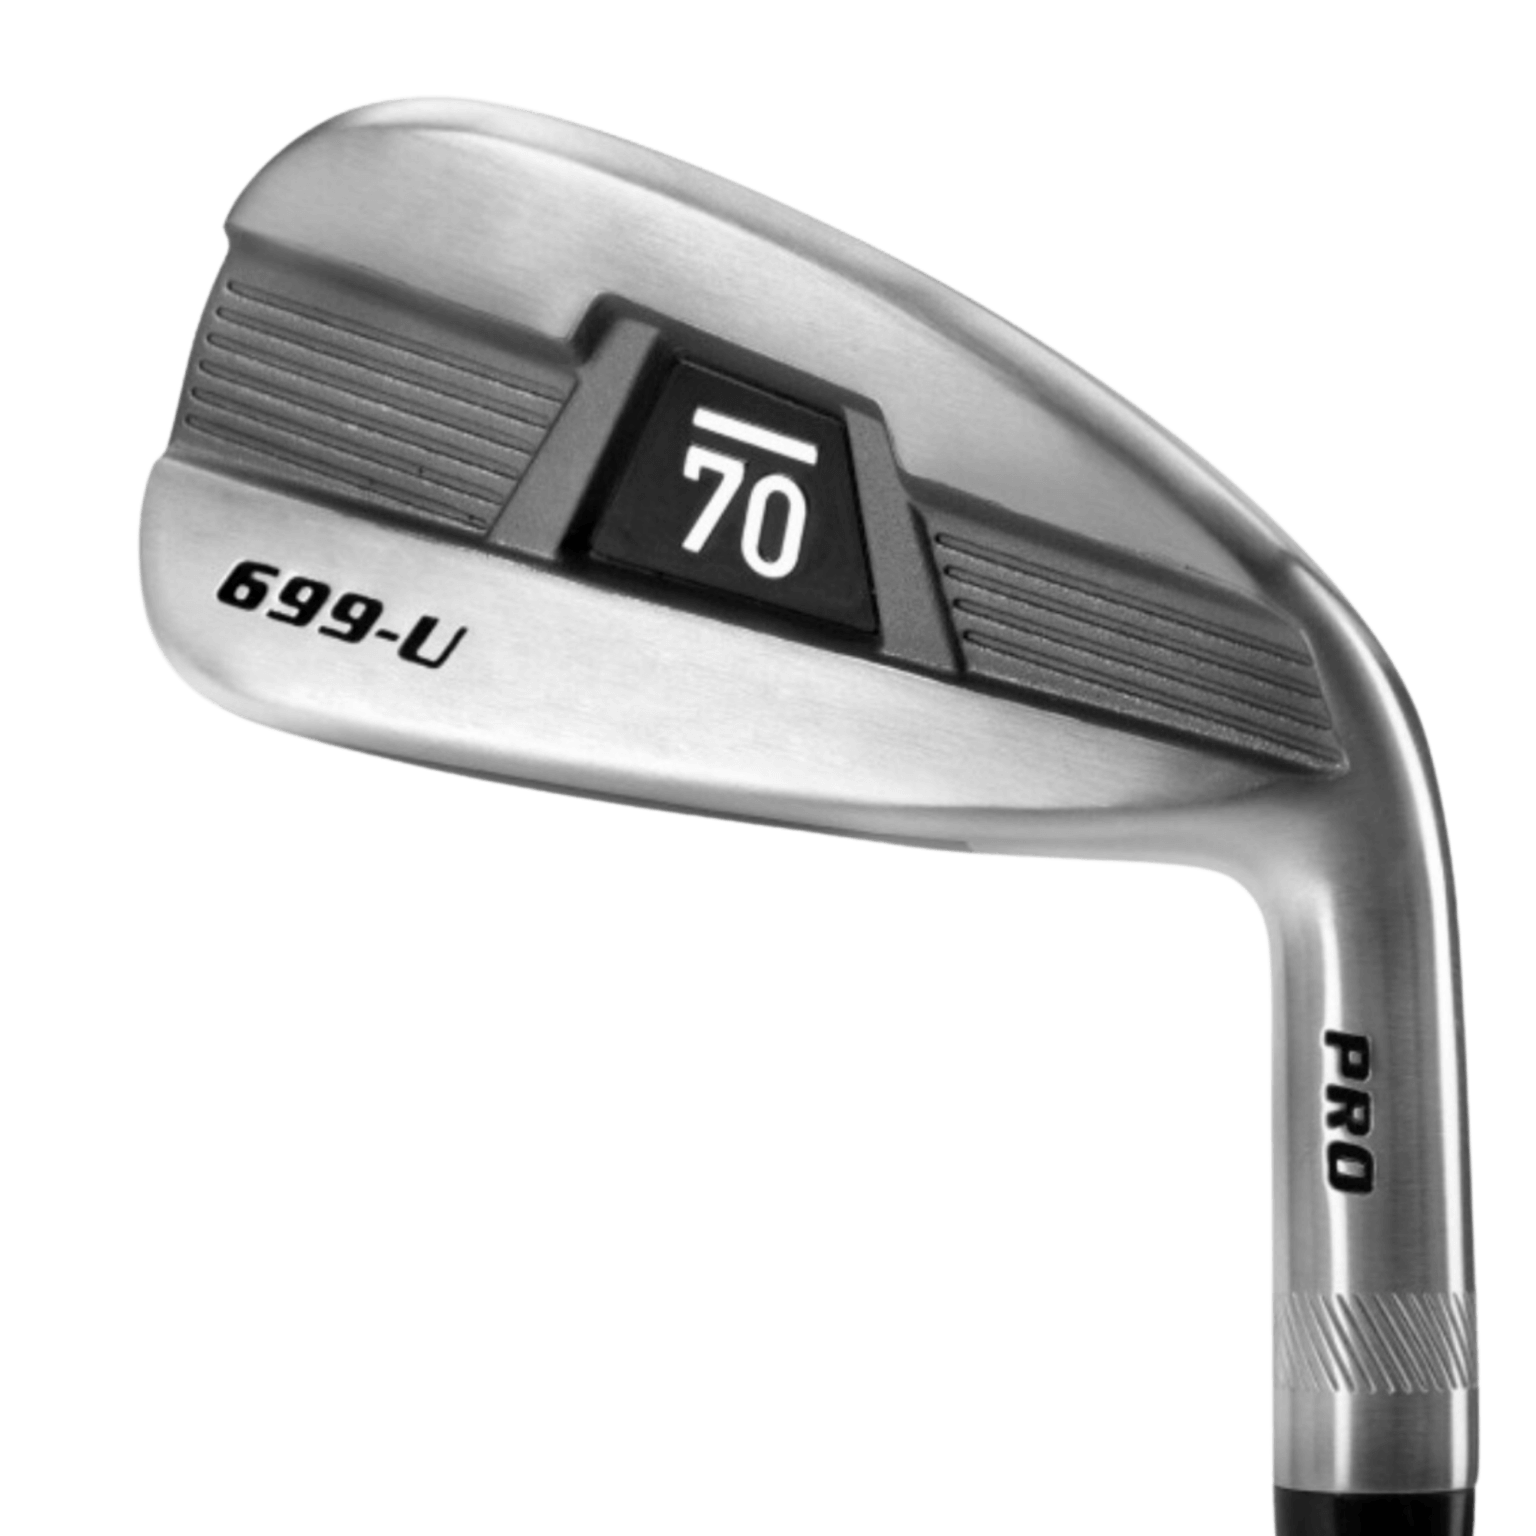 Sub 70 699 Pro V2 Utility Irons Review